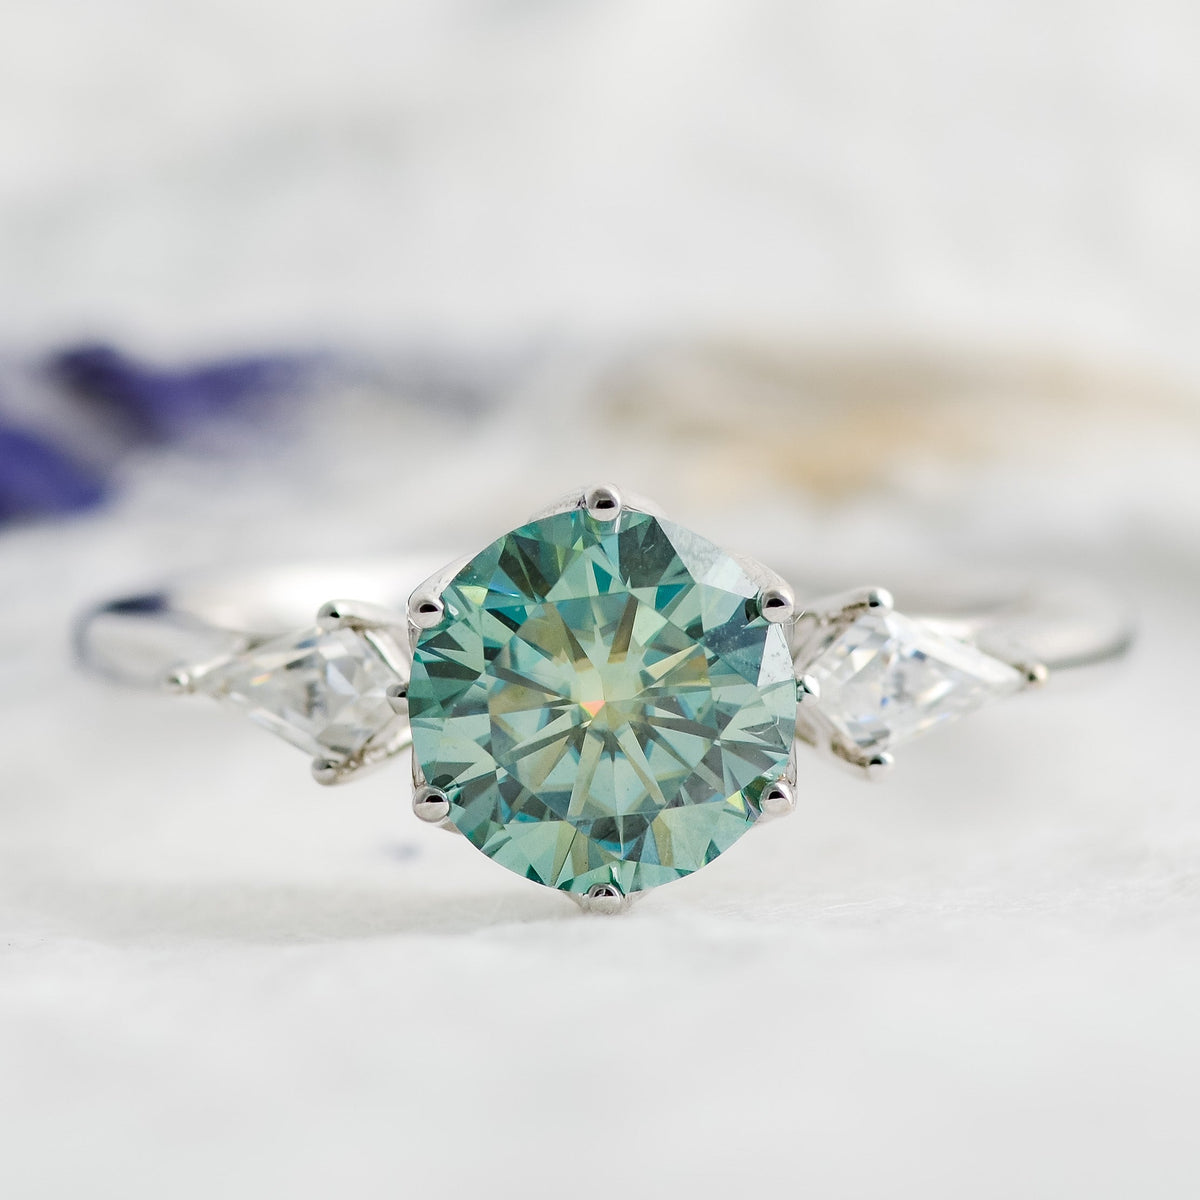 Green Moissanite and Green Jade Solitaire Ring